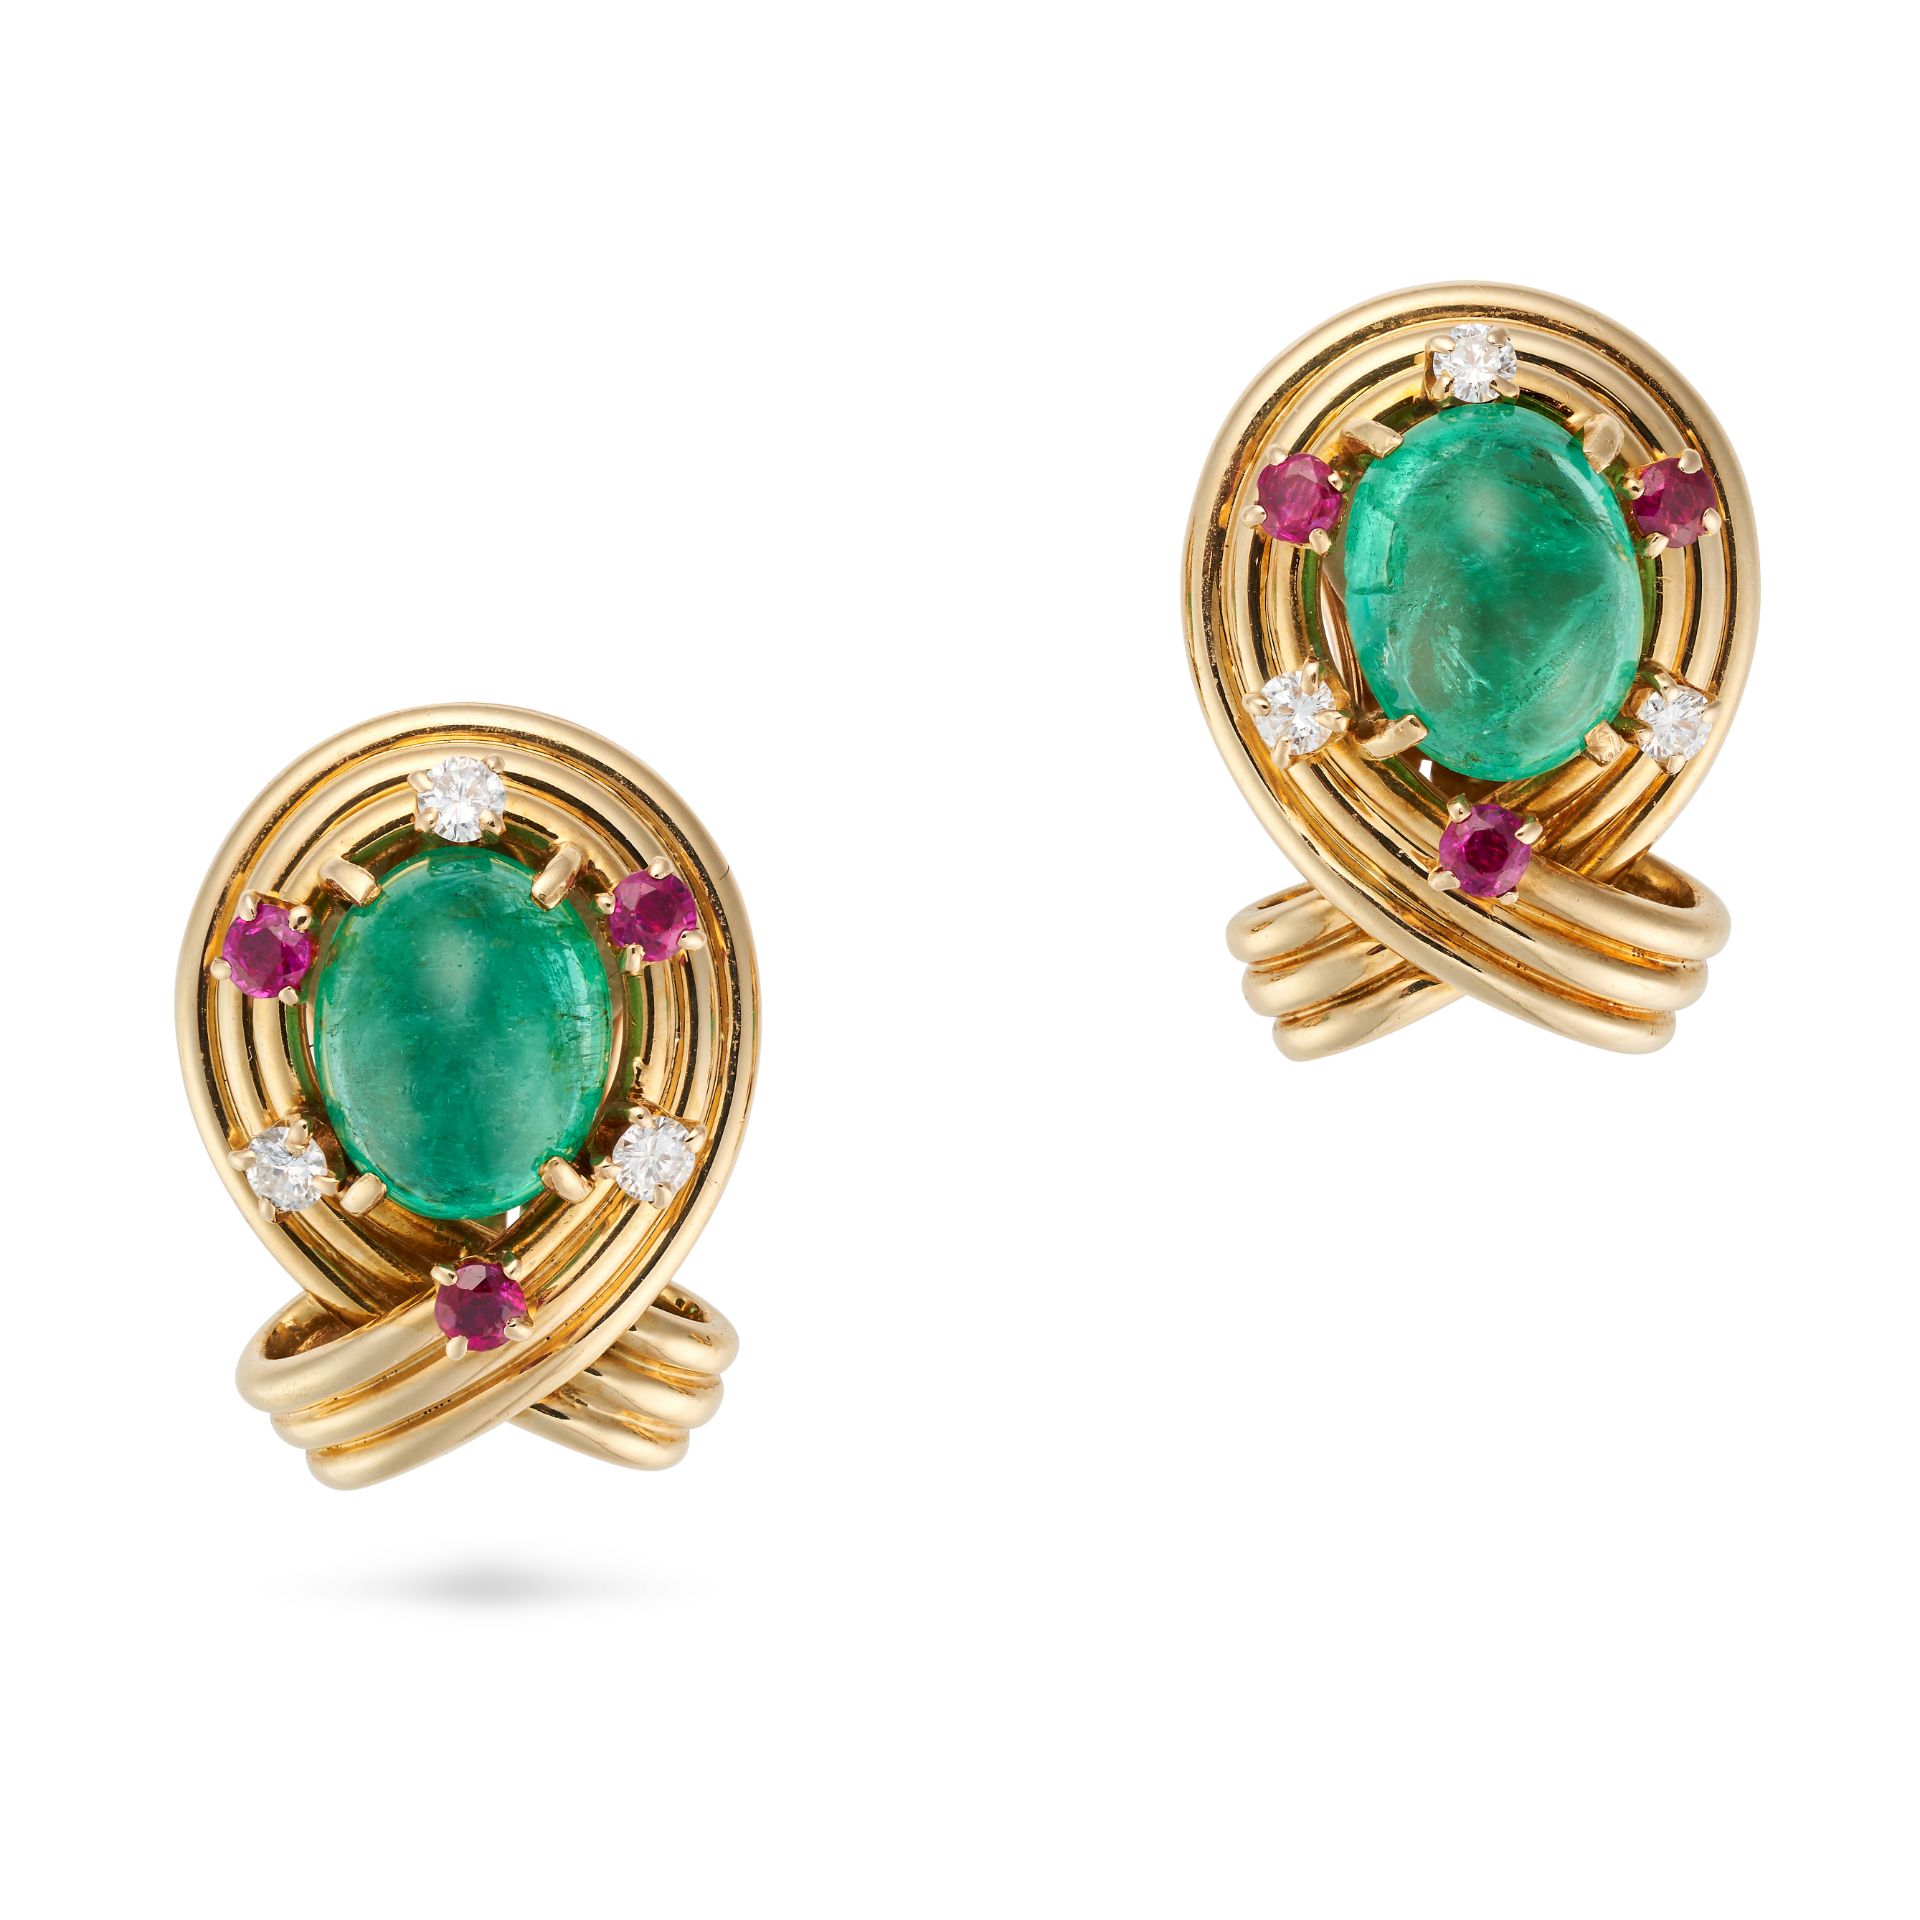 VAN CLEEF & ARPELS, A PAIR OF EMERALD, RUBY AND DIAMOND CLIP EARRINGS in 18ct yellow gold, each s...